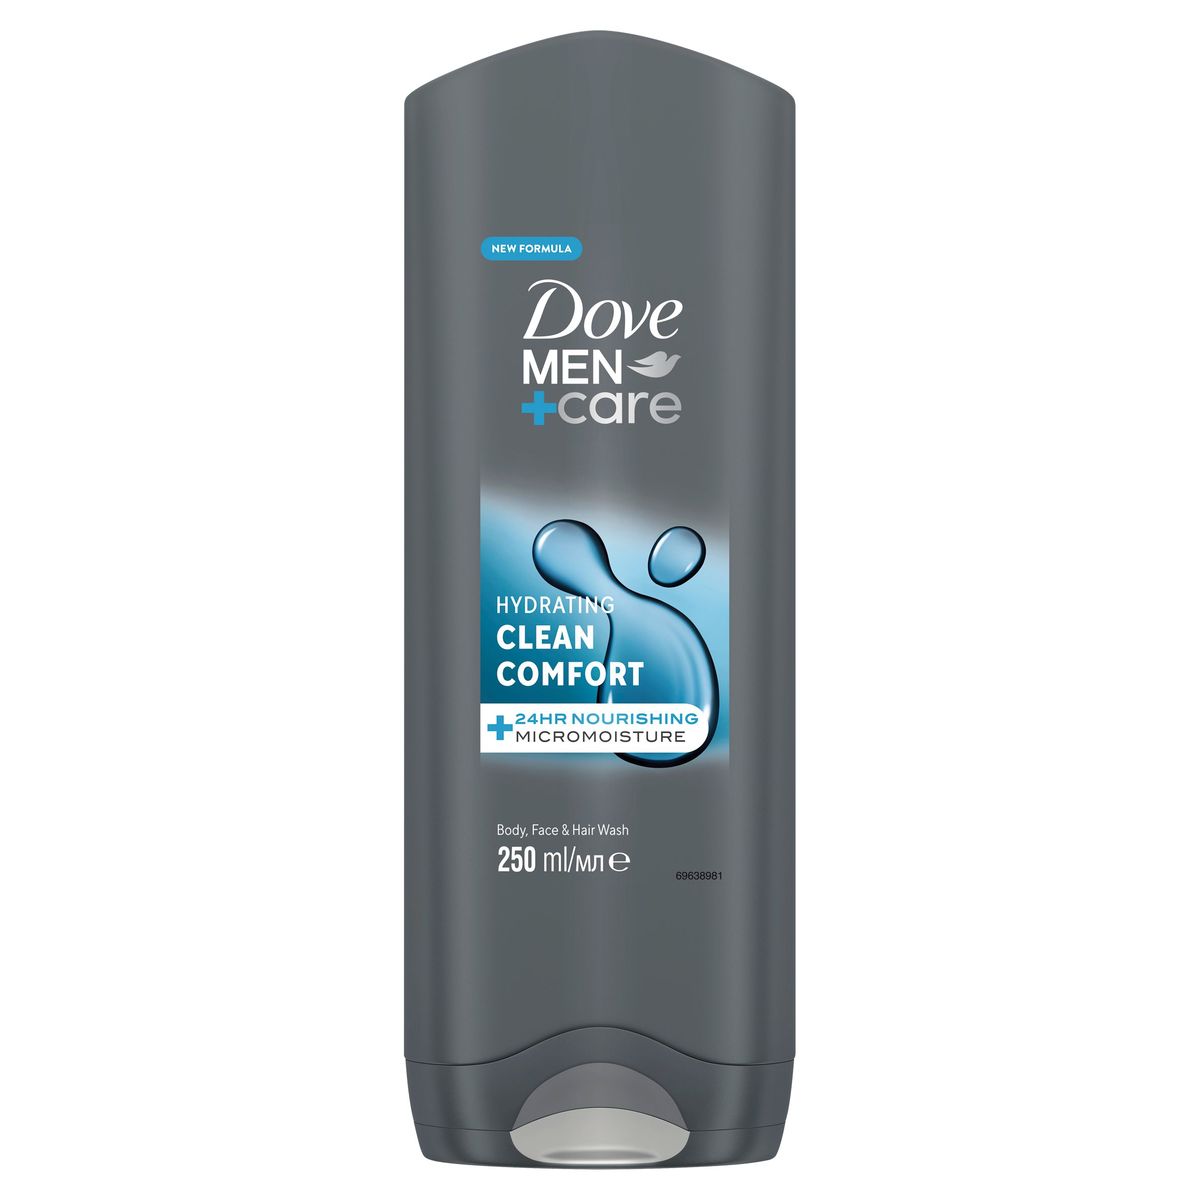 Dove Men+ Care Clean Comfort Body and Face Wash 250 ml